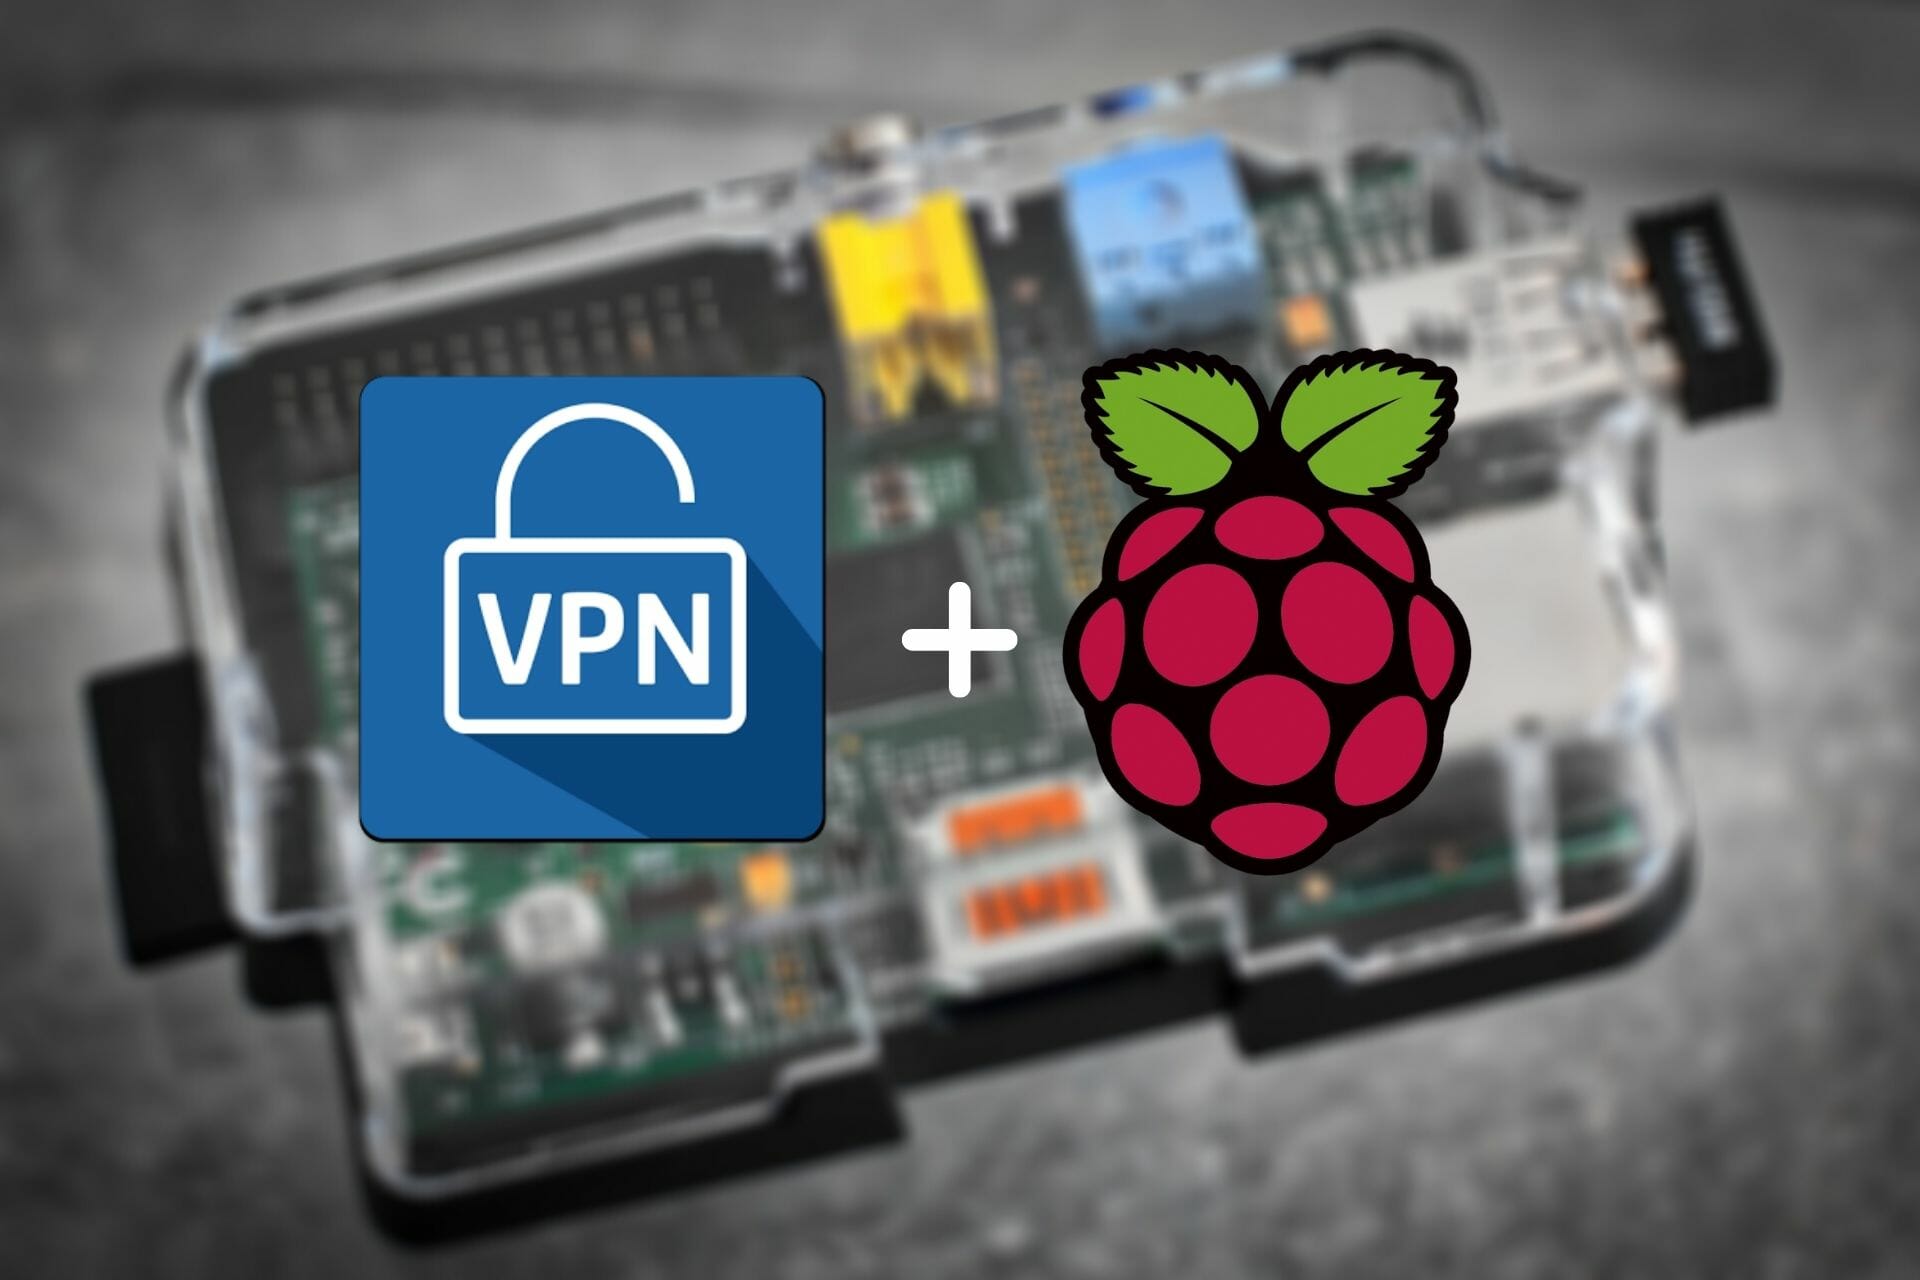 How to set up VPN on Raspberry Pi